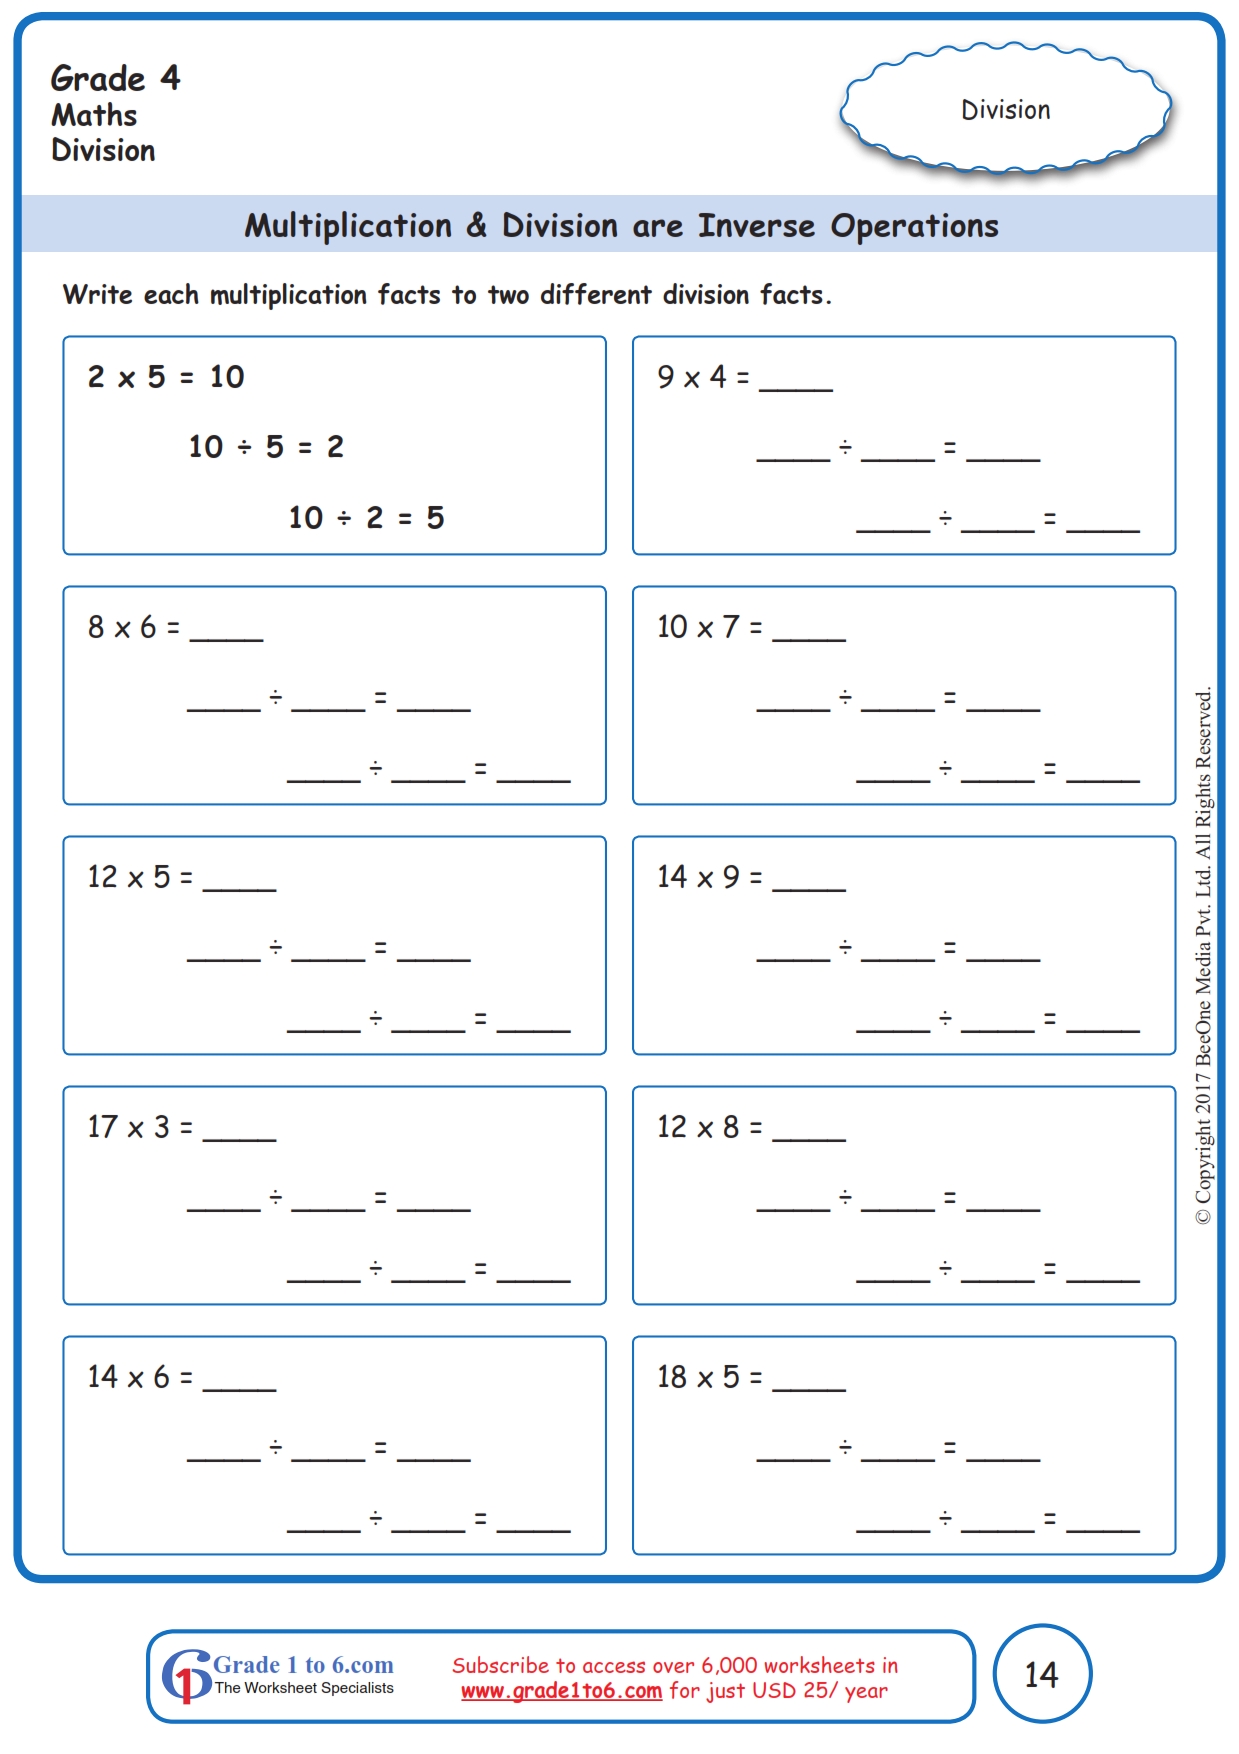  Inverse Operations Worksheets Multiplication And Division 